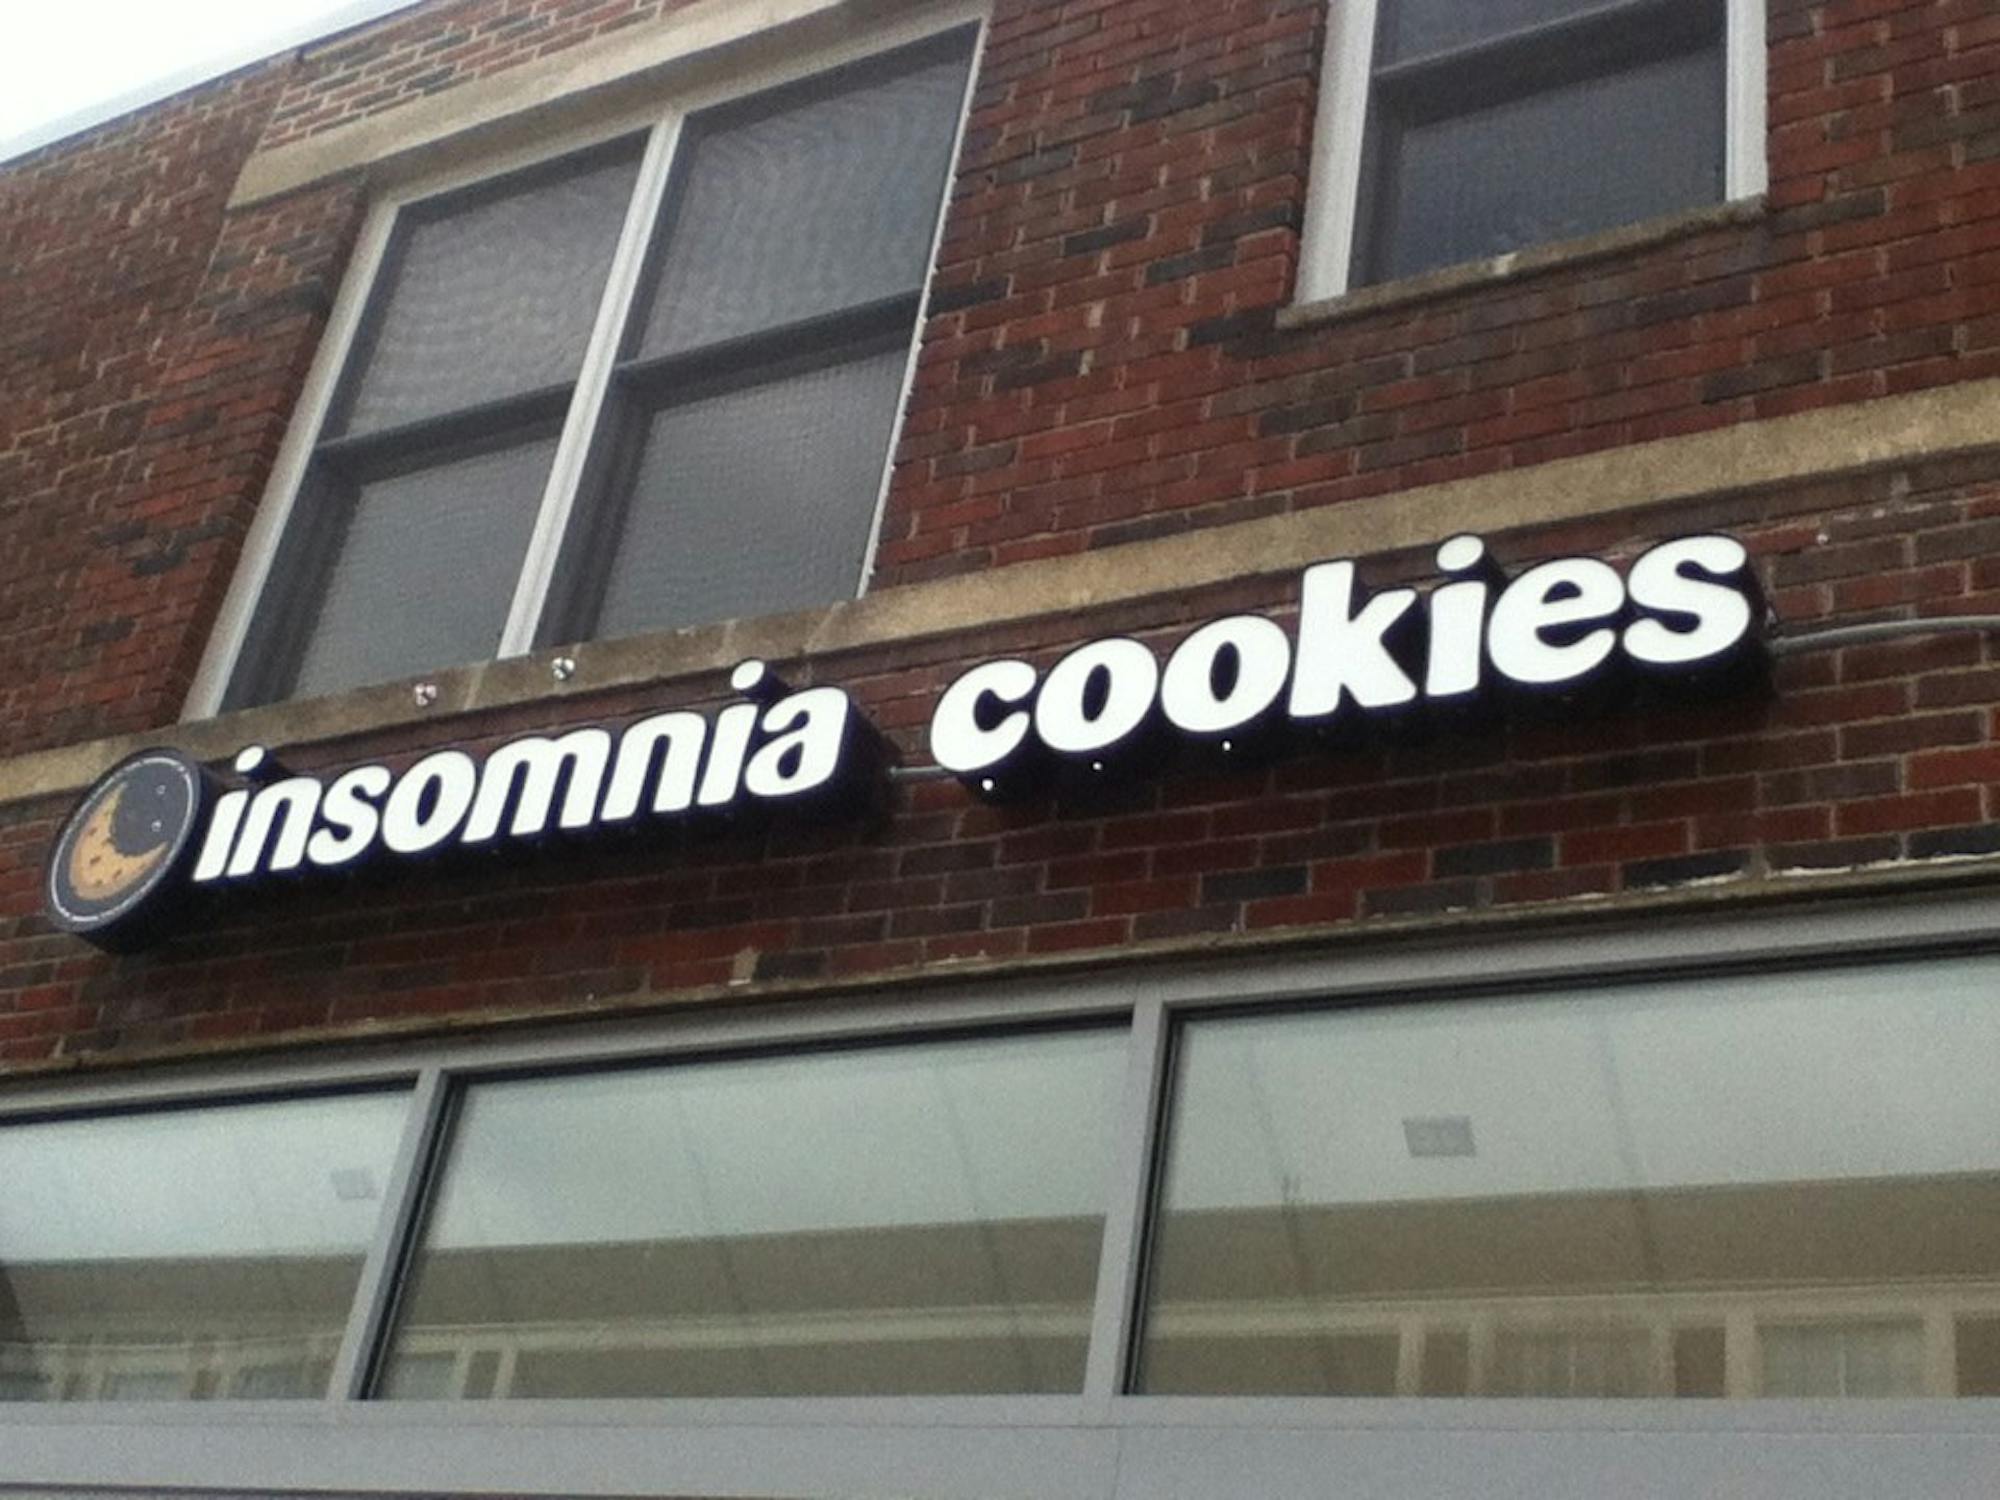 	Insomia Cookies can bring cookies to students in the middle of the night.